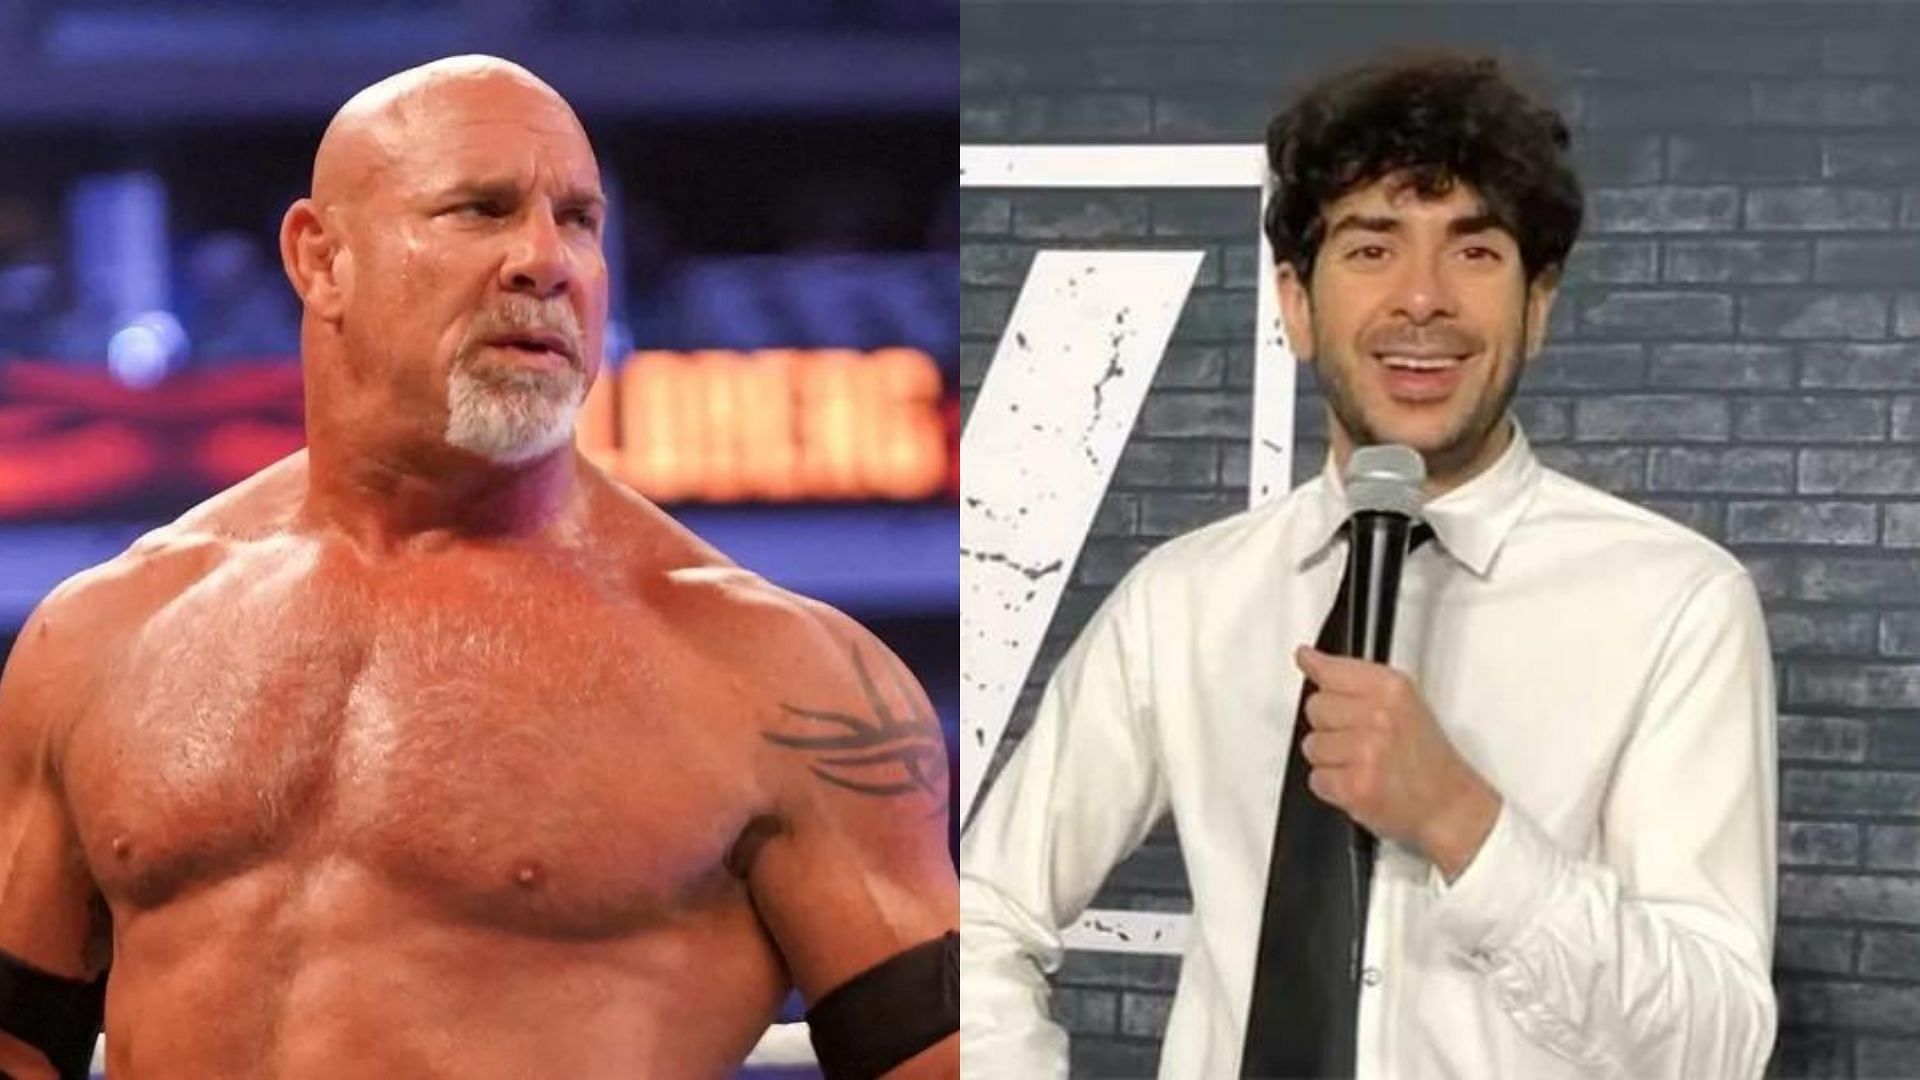 A WWE legend has demanded a huge contract to compete in AEW